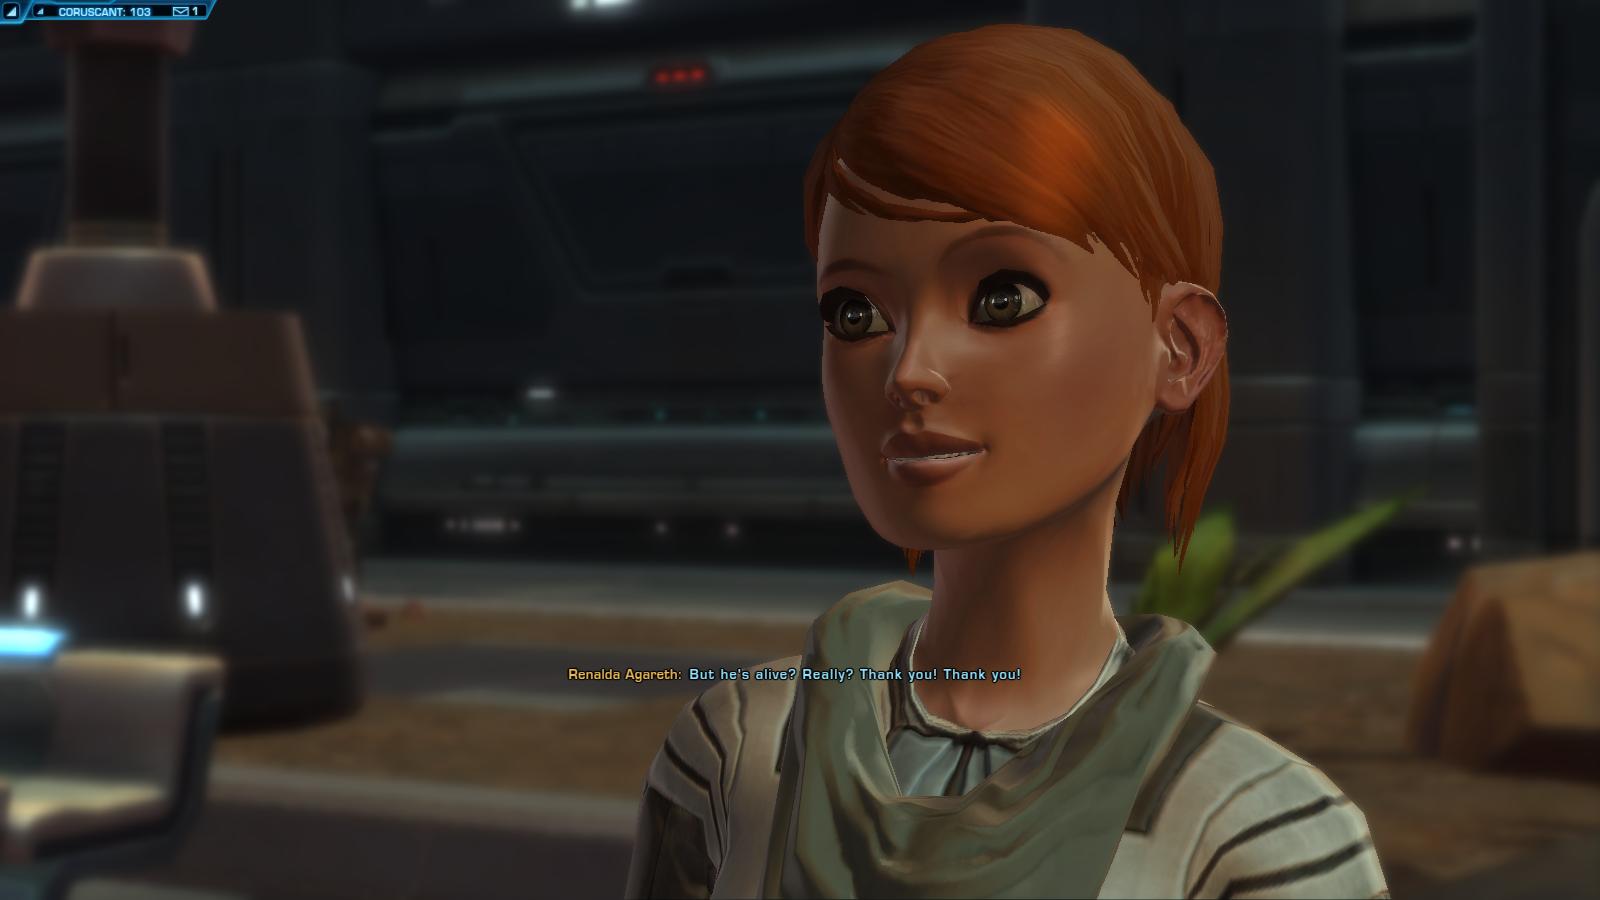 Swtor No Patch Today